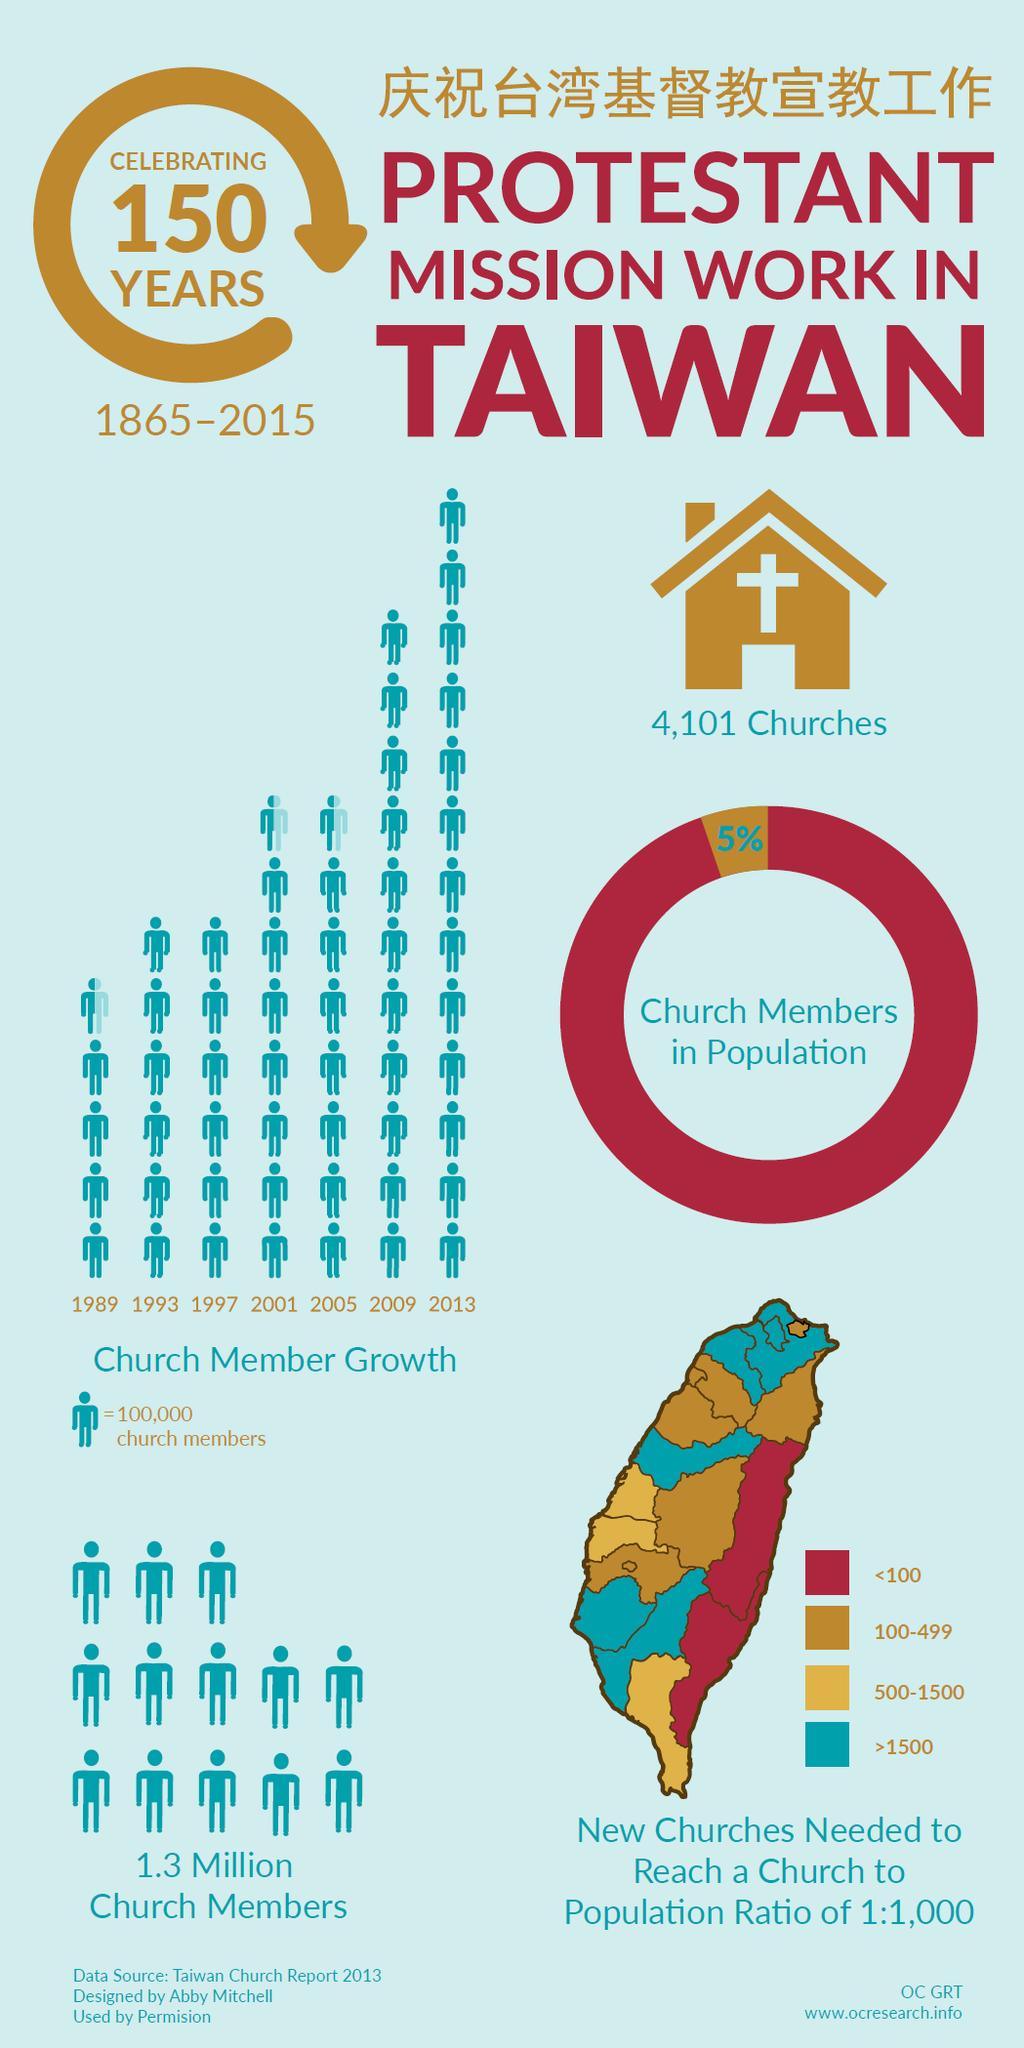 Infographic 2: Protestant Mission Work in Taiwan Looking Ahead Since more than 22 million people in Taiwan are not yet members of a Protestant church, this infographic was developed to cast vision